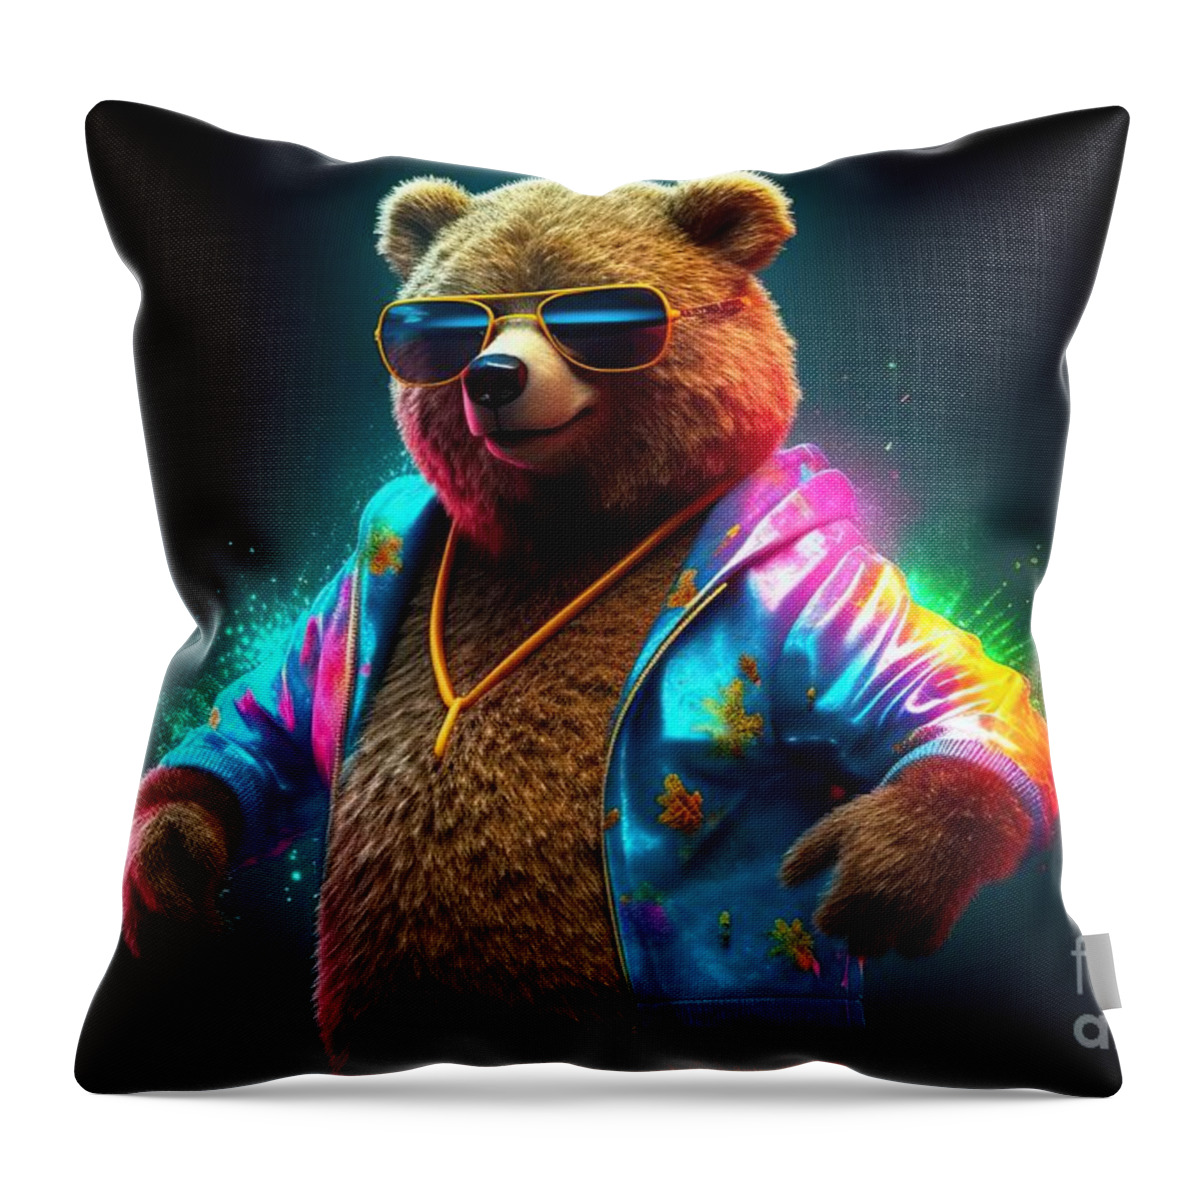 Animal Throw Pillow featuring the painting party dancing clothes sco animal bear happy Creative technology Created party nightlife dance music fashion club funky groovy style outfit wild fun vibrant colourful entertainment leisure by N Akkash